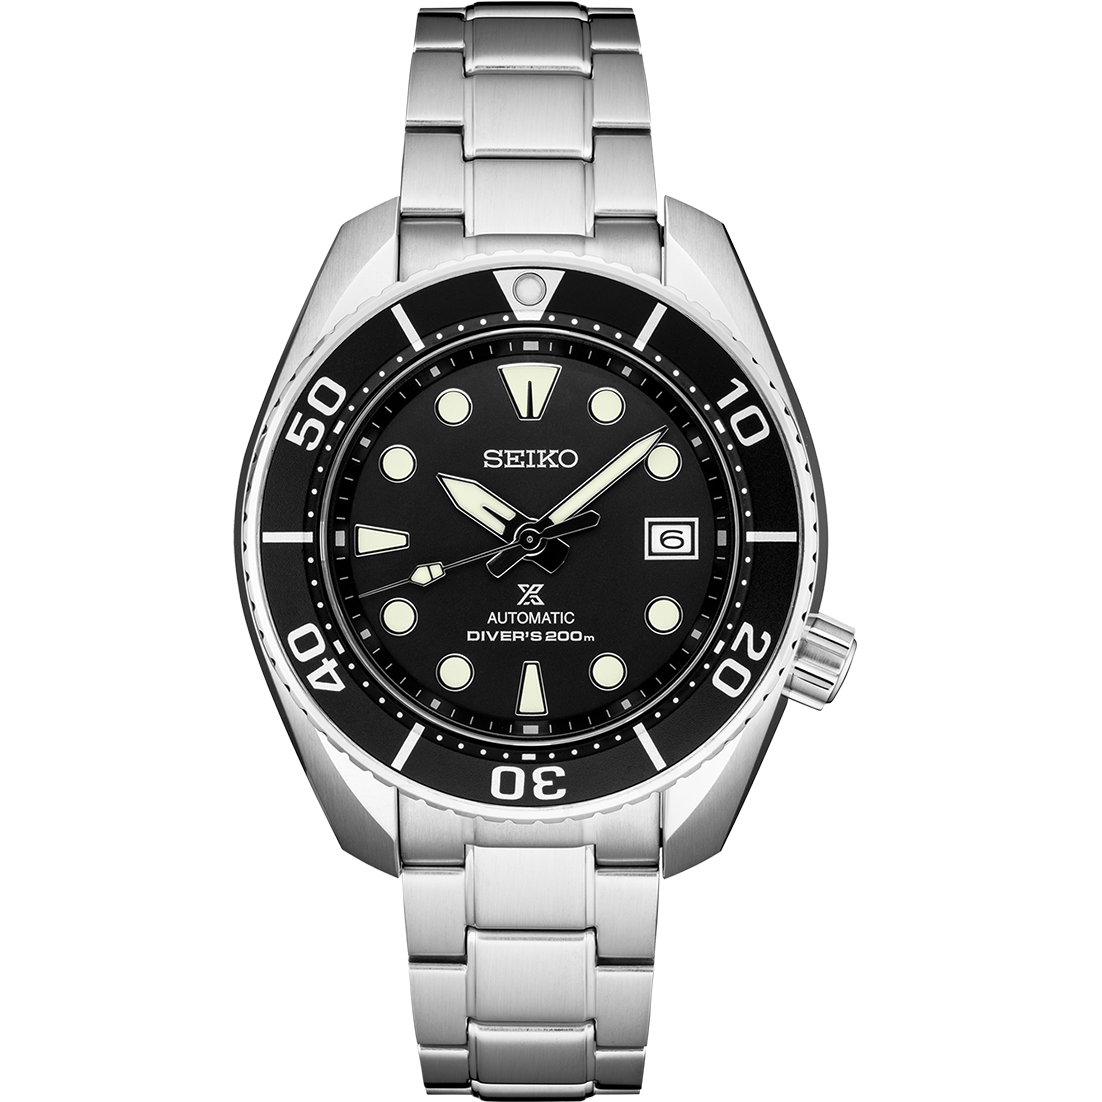 Seiko Prospex Diver's 200m Stainless Steel Automatic Watch
Clasp: Deployment
Dial Color: Black
Bezel: Black
Mm: 45